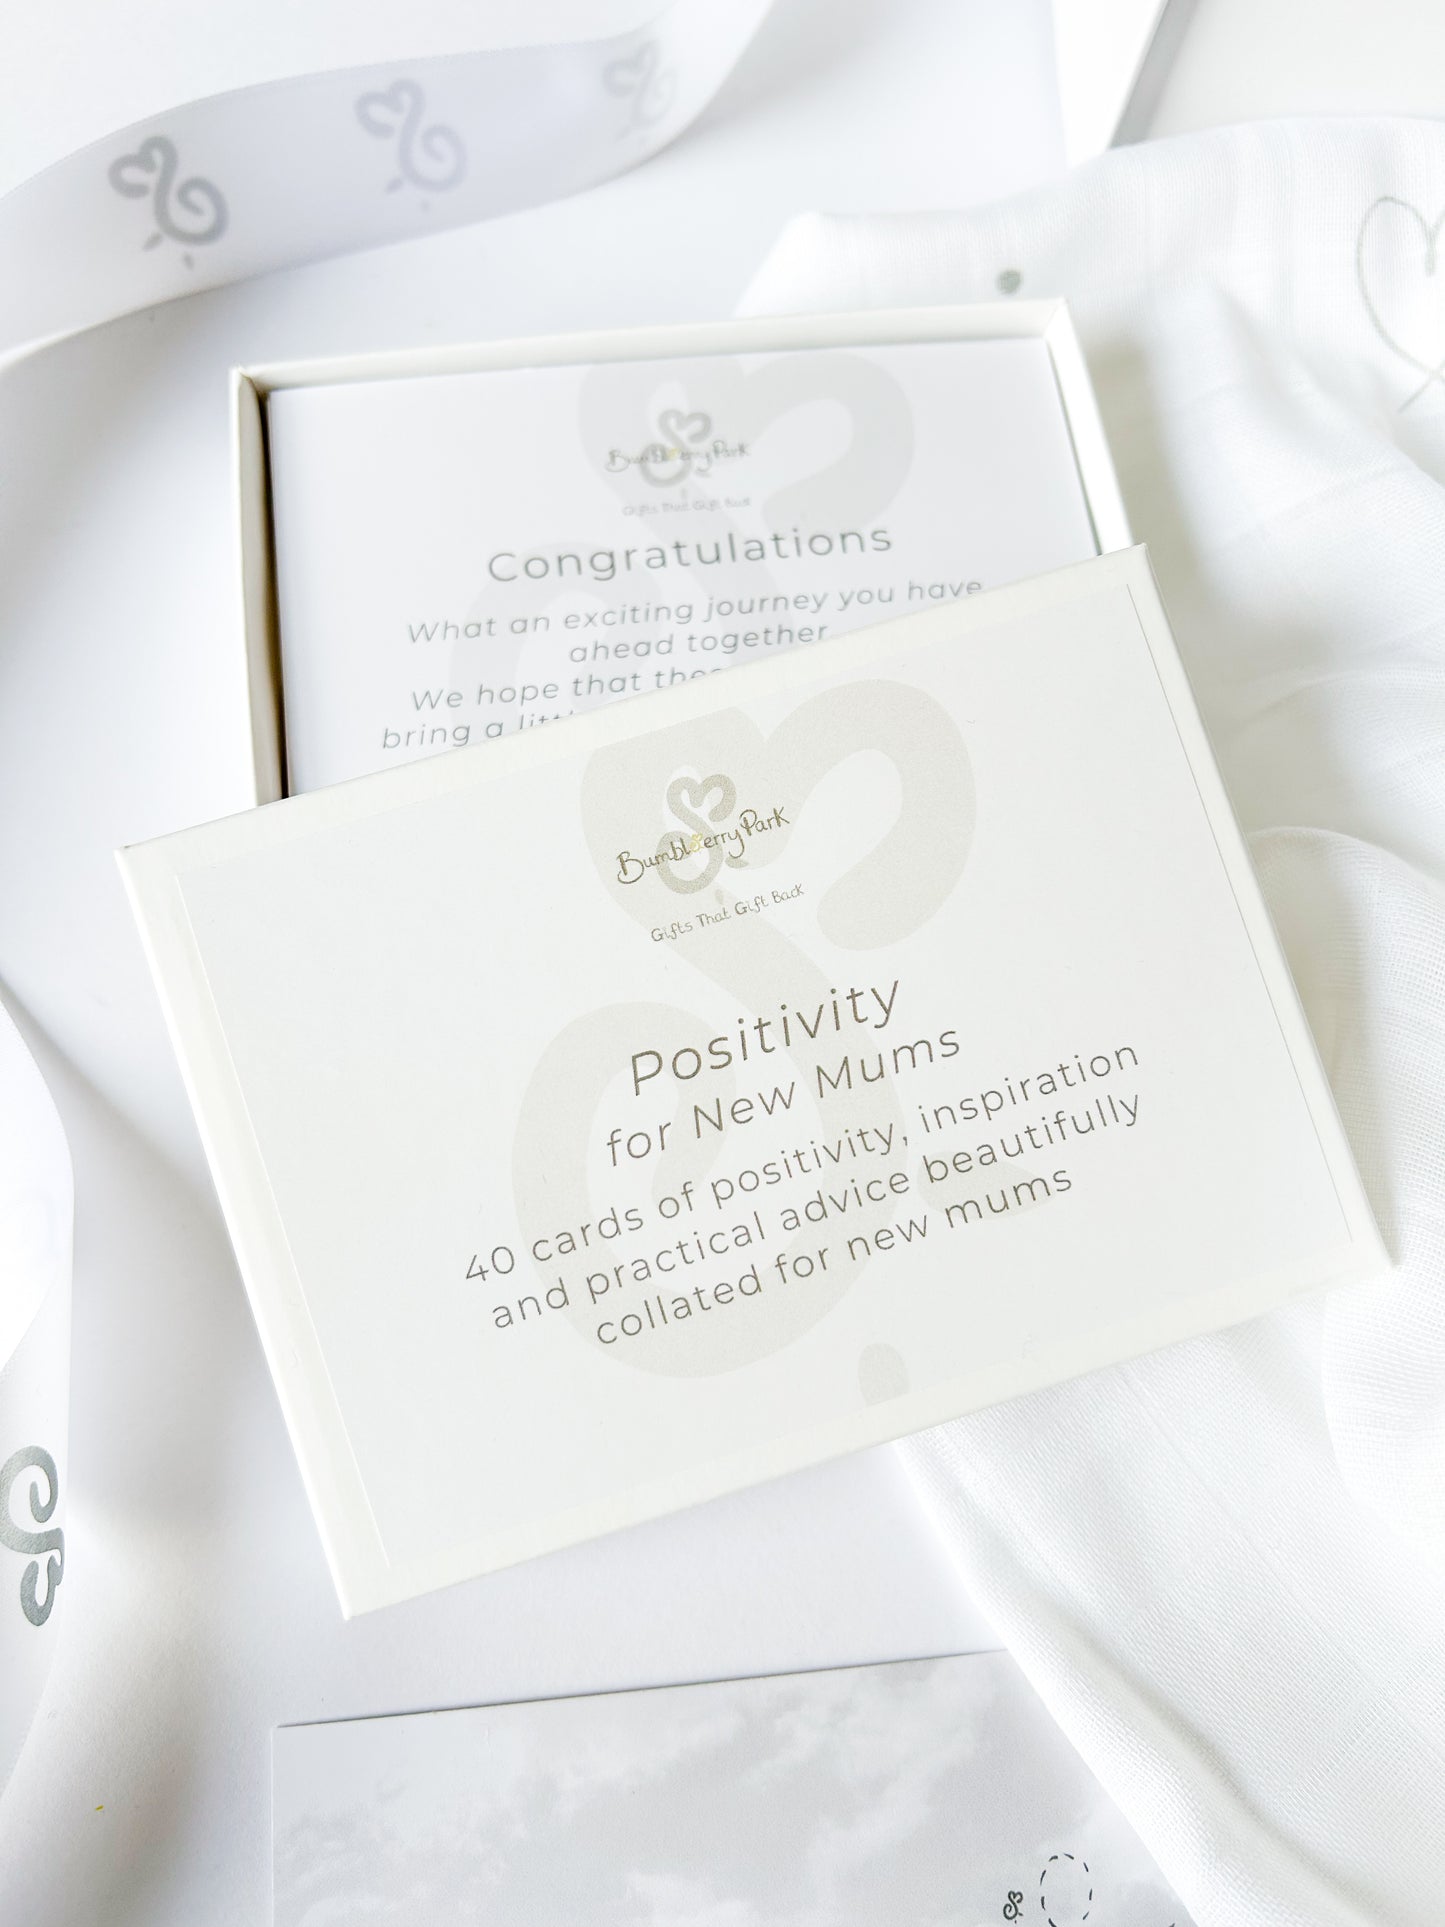 luxury gift set of affirmation cards for new mums with positive messages, inspiring quotes and motivational mindset